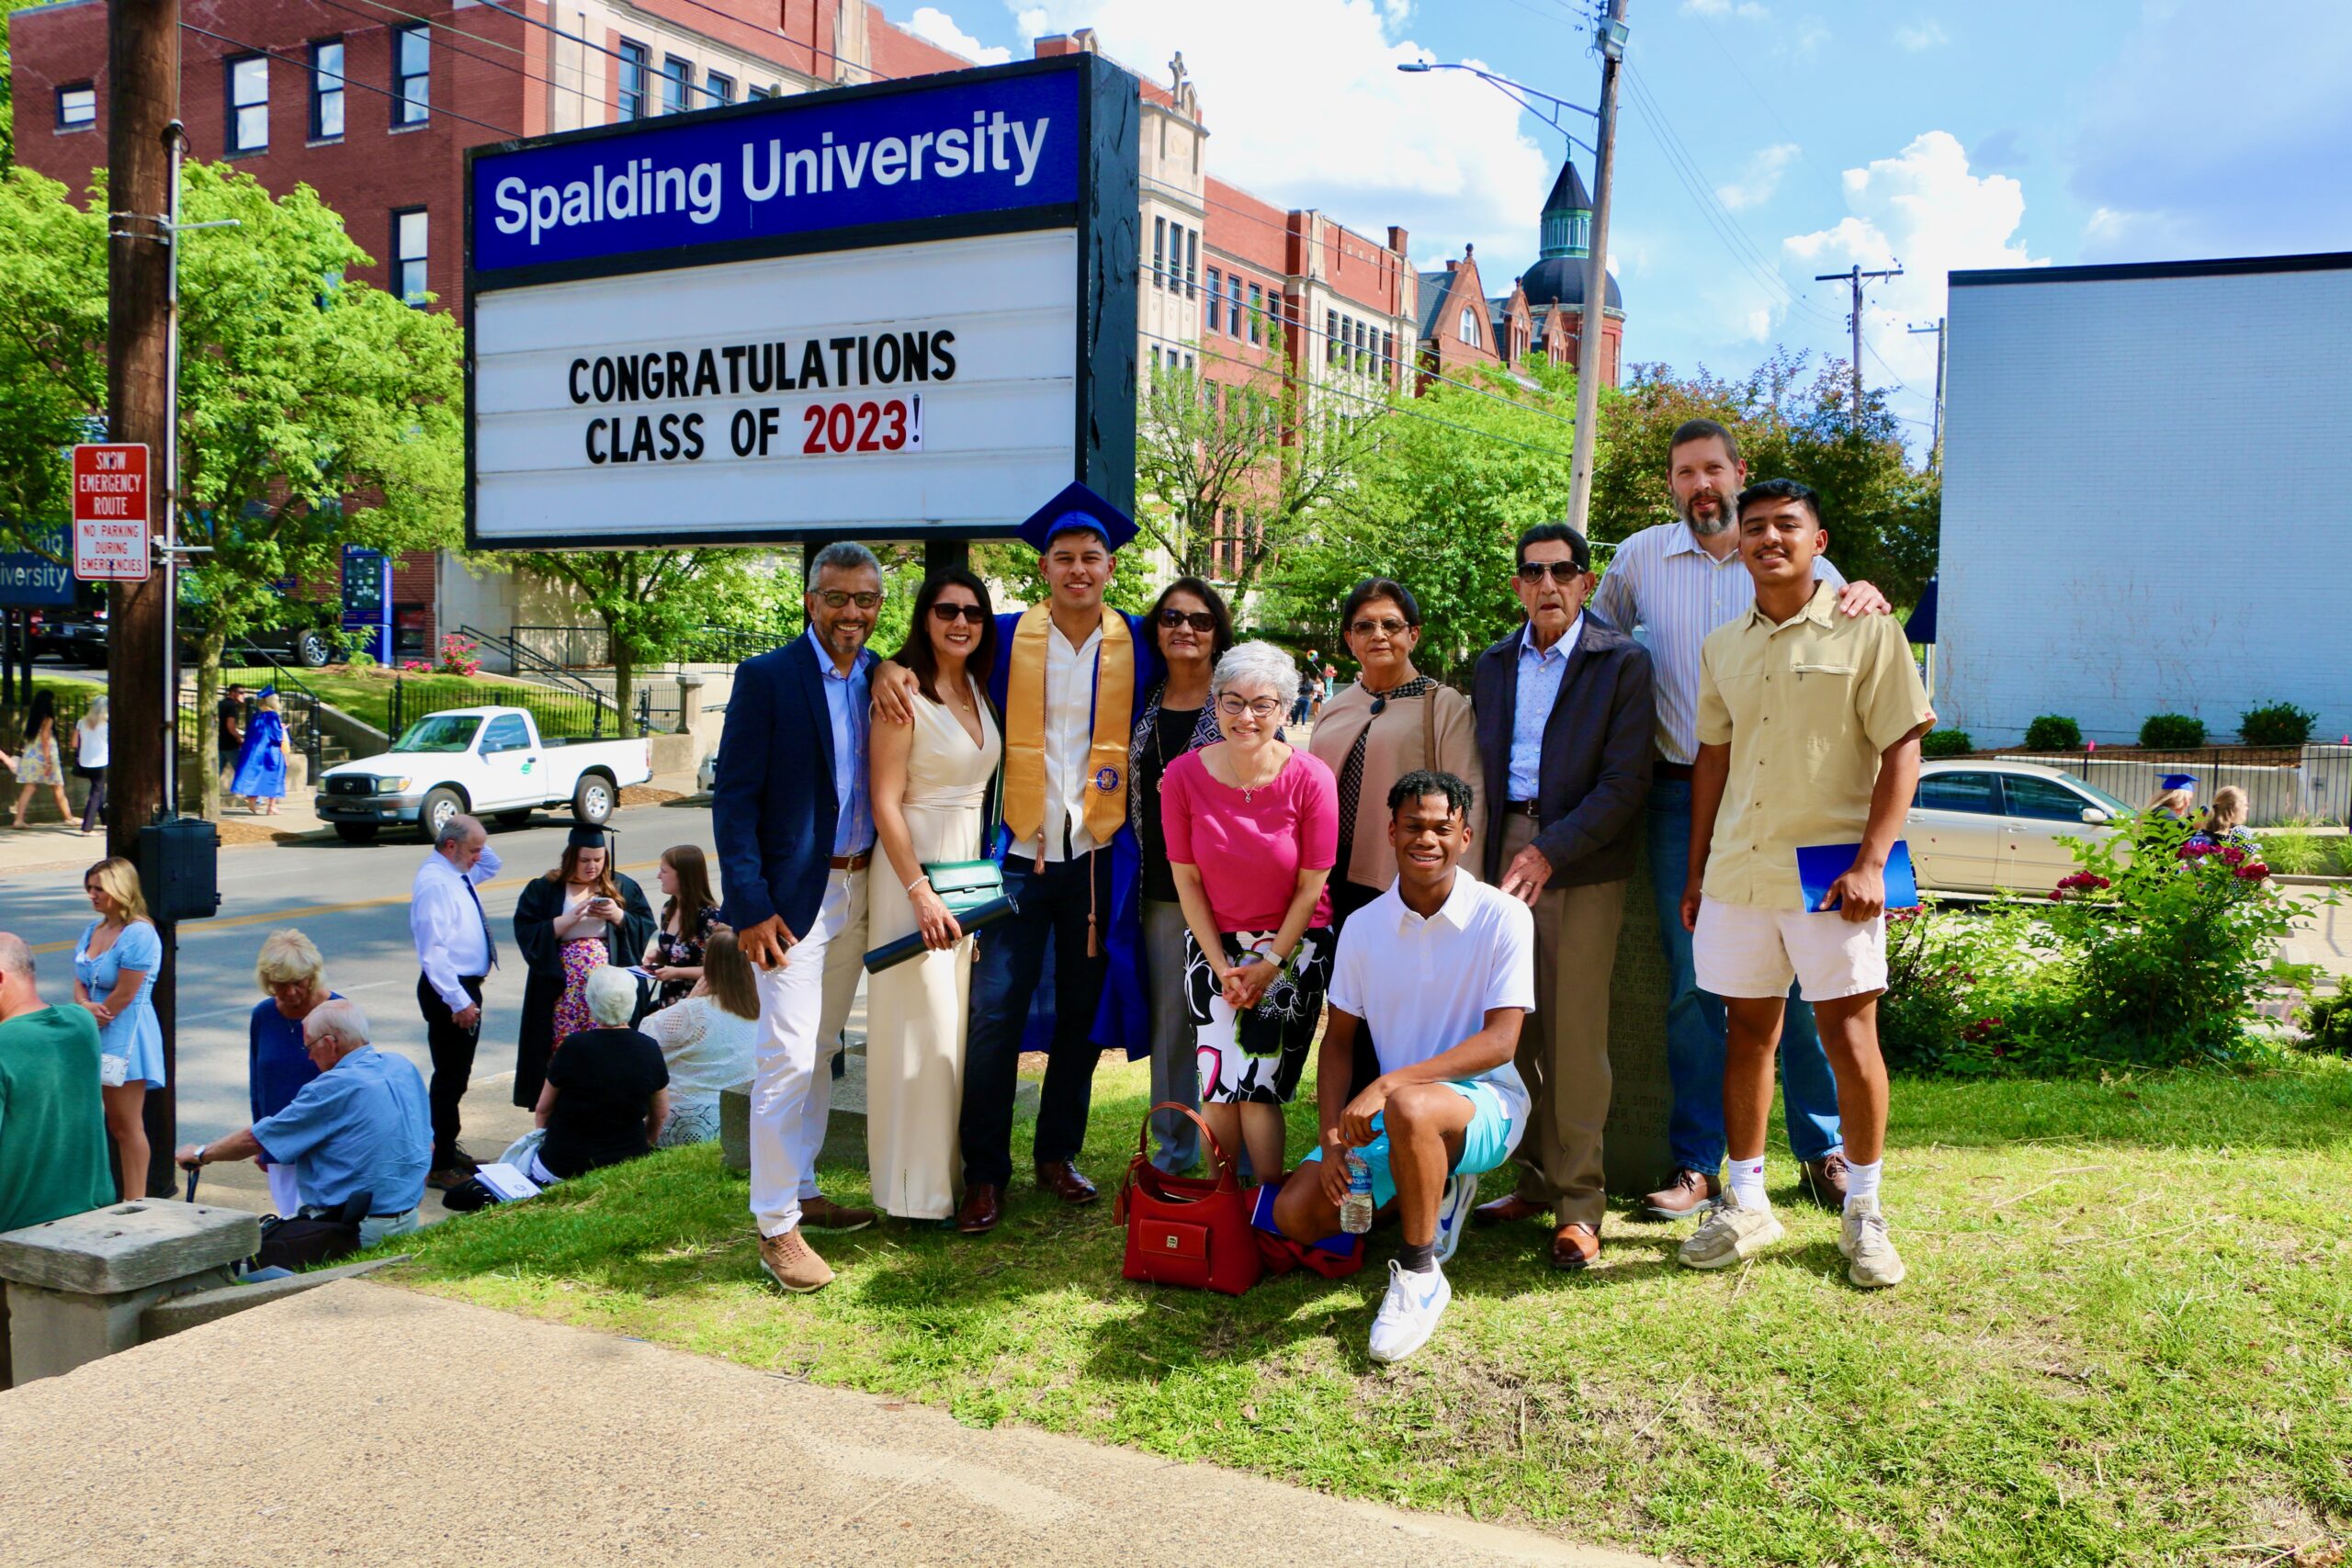 Spalding bachelor's graduate posing with family in front of sign reading "Congratulations Class of 2023"